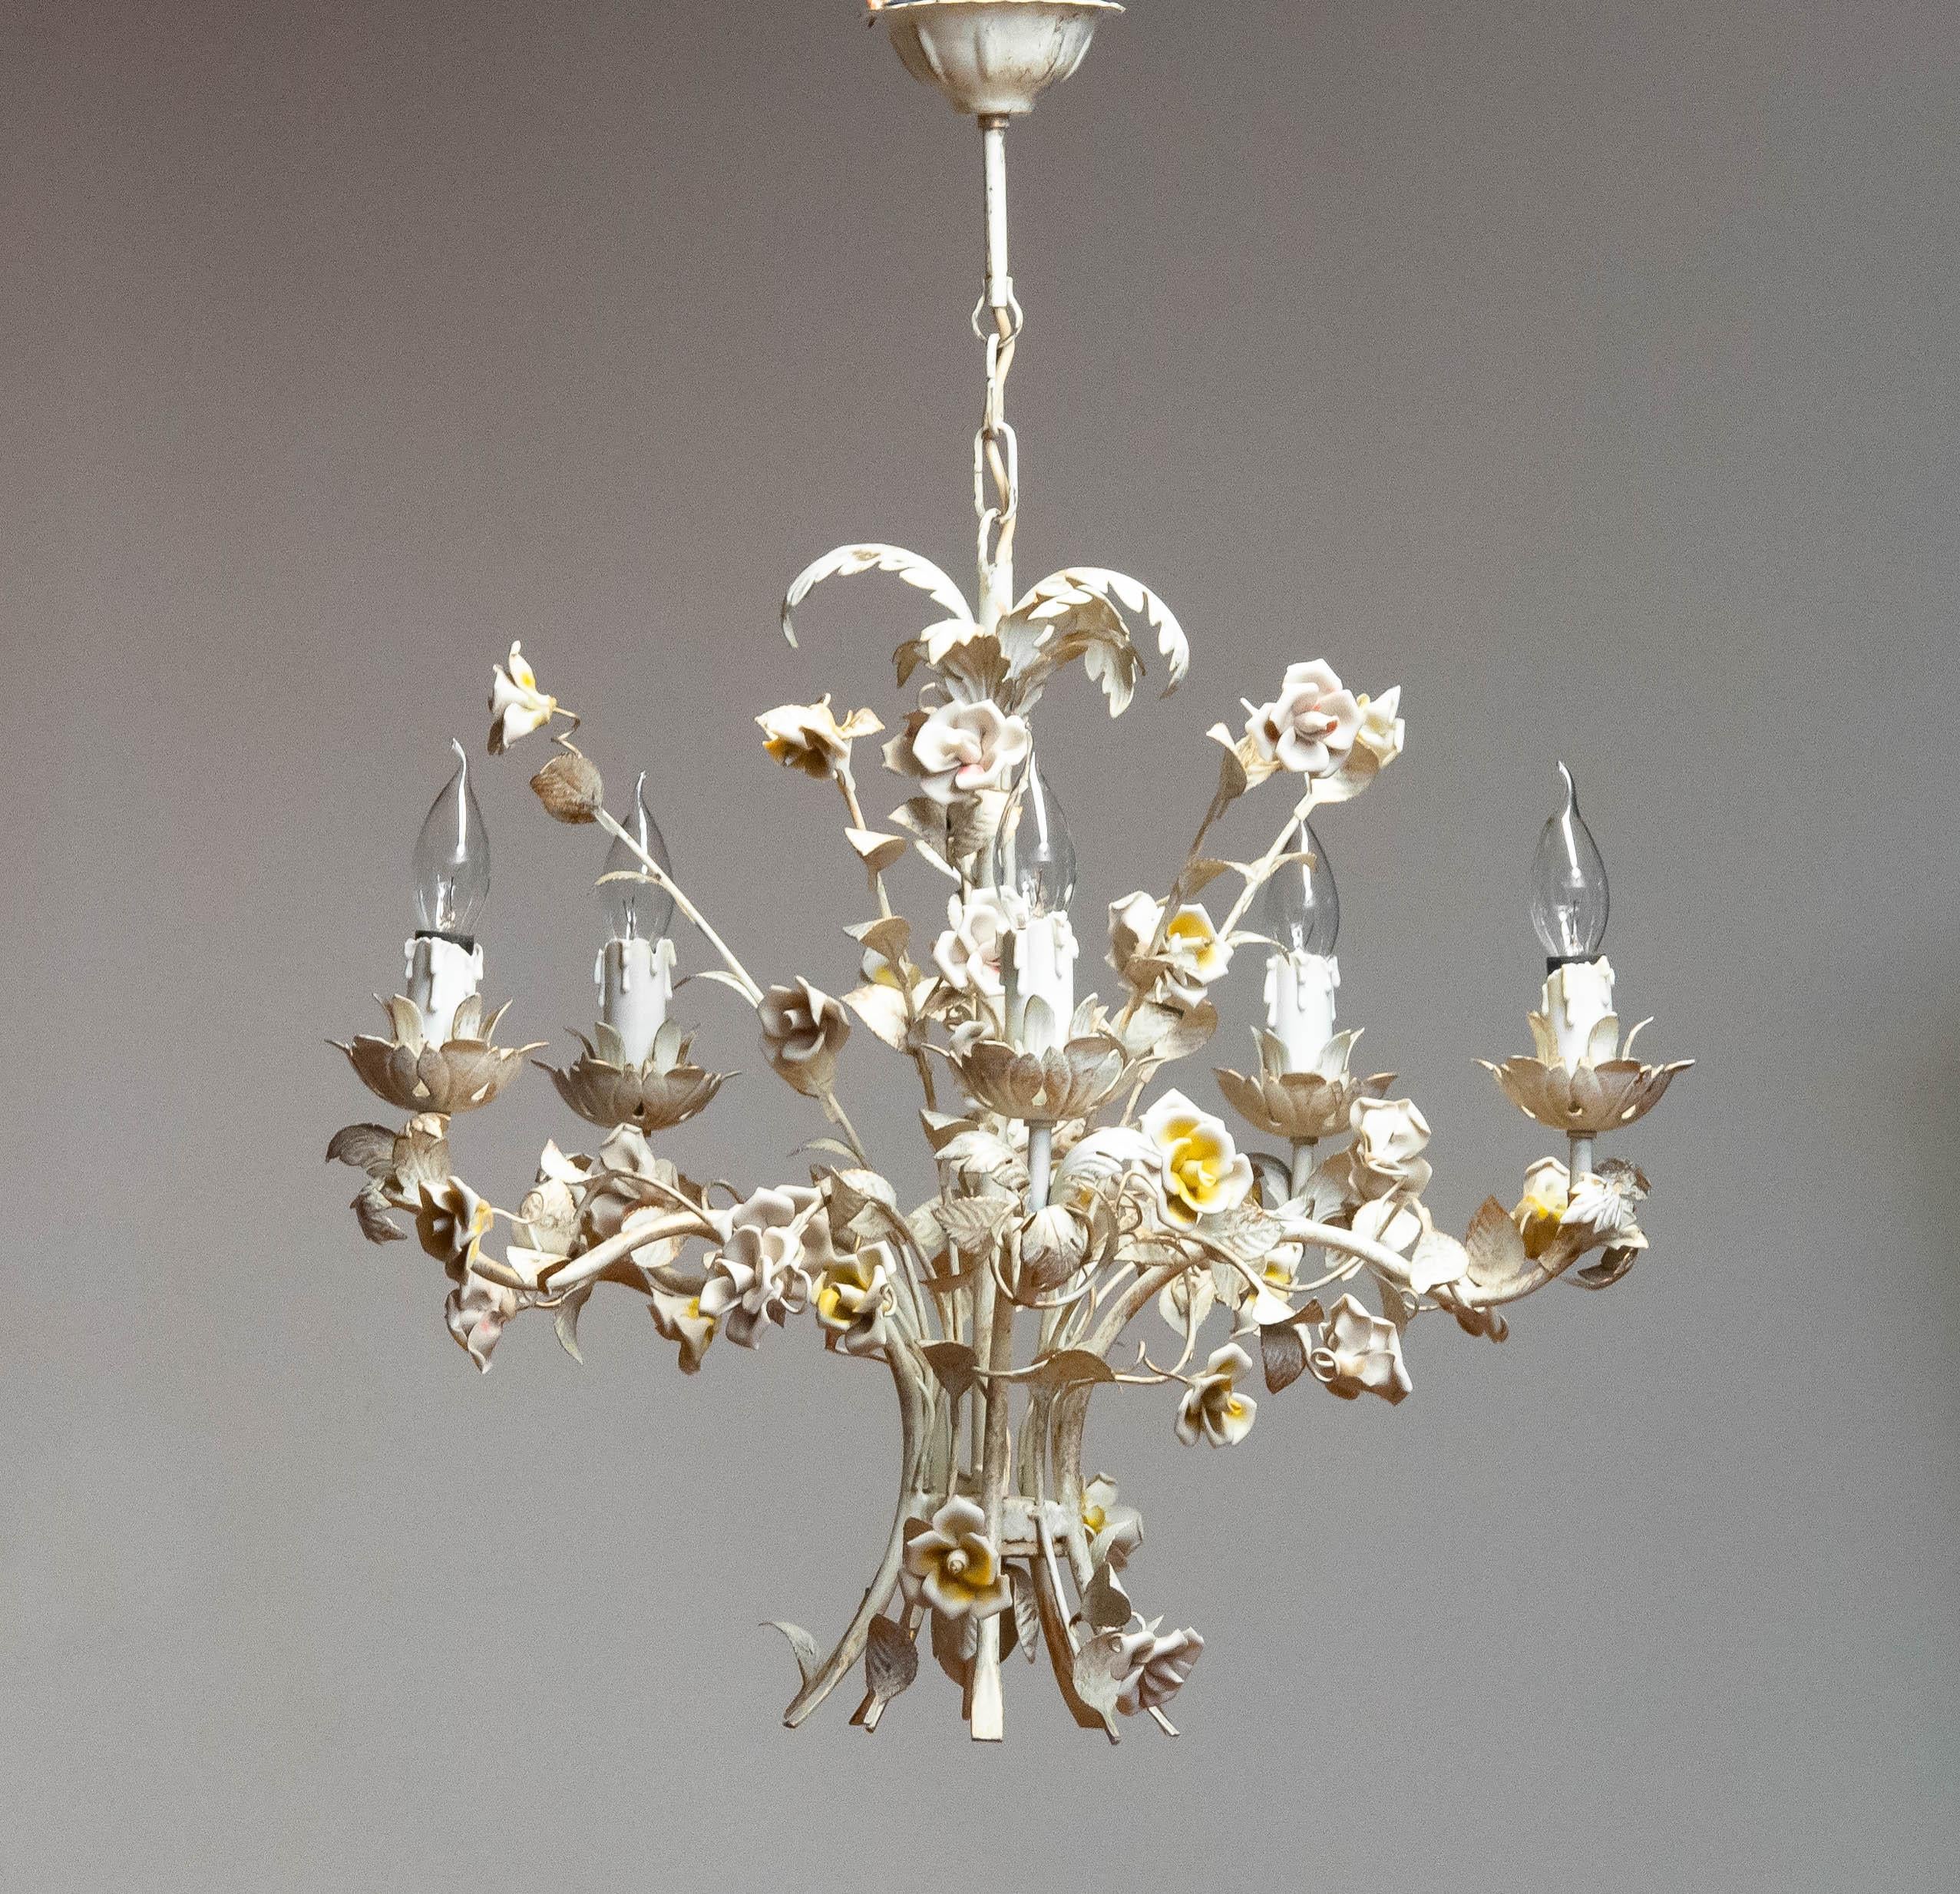 1960s Boho Chic Italian Pastel Color Painted Metal Chandelier With Floral Decor For Sale 2